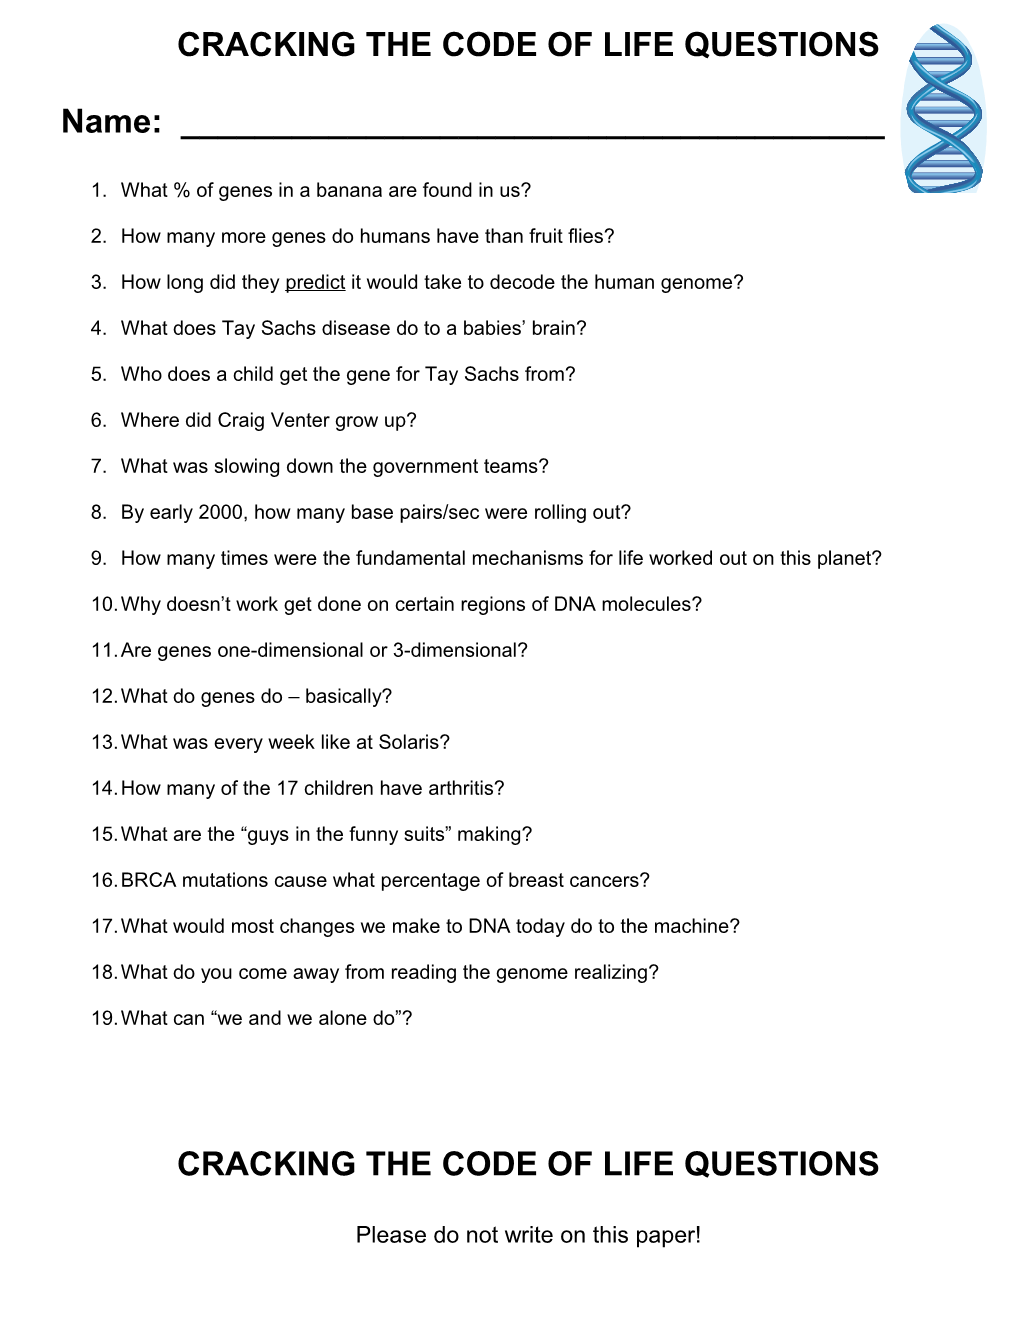 Cracking the Code of Life Questions